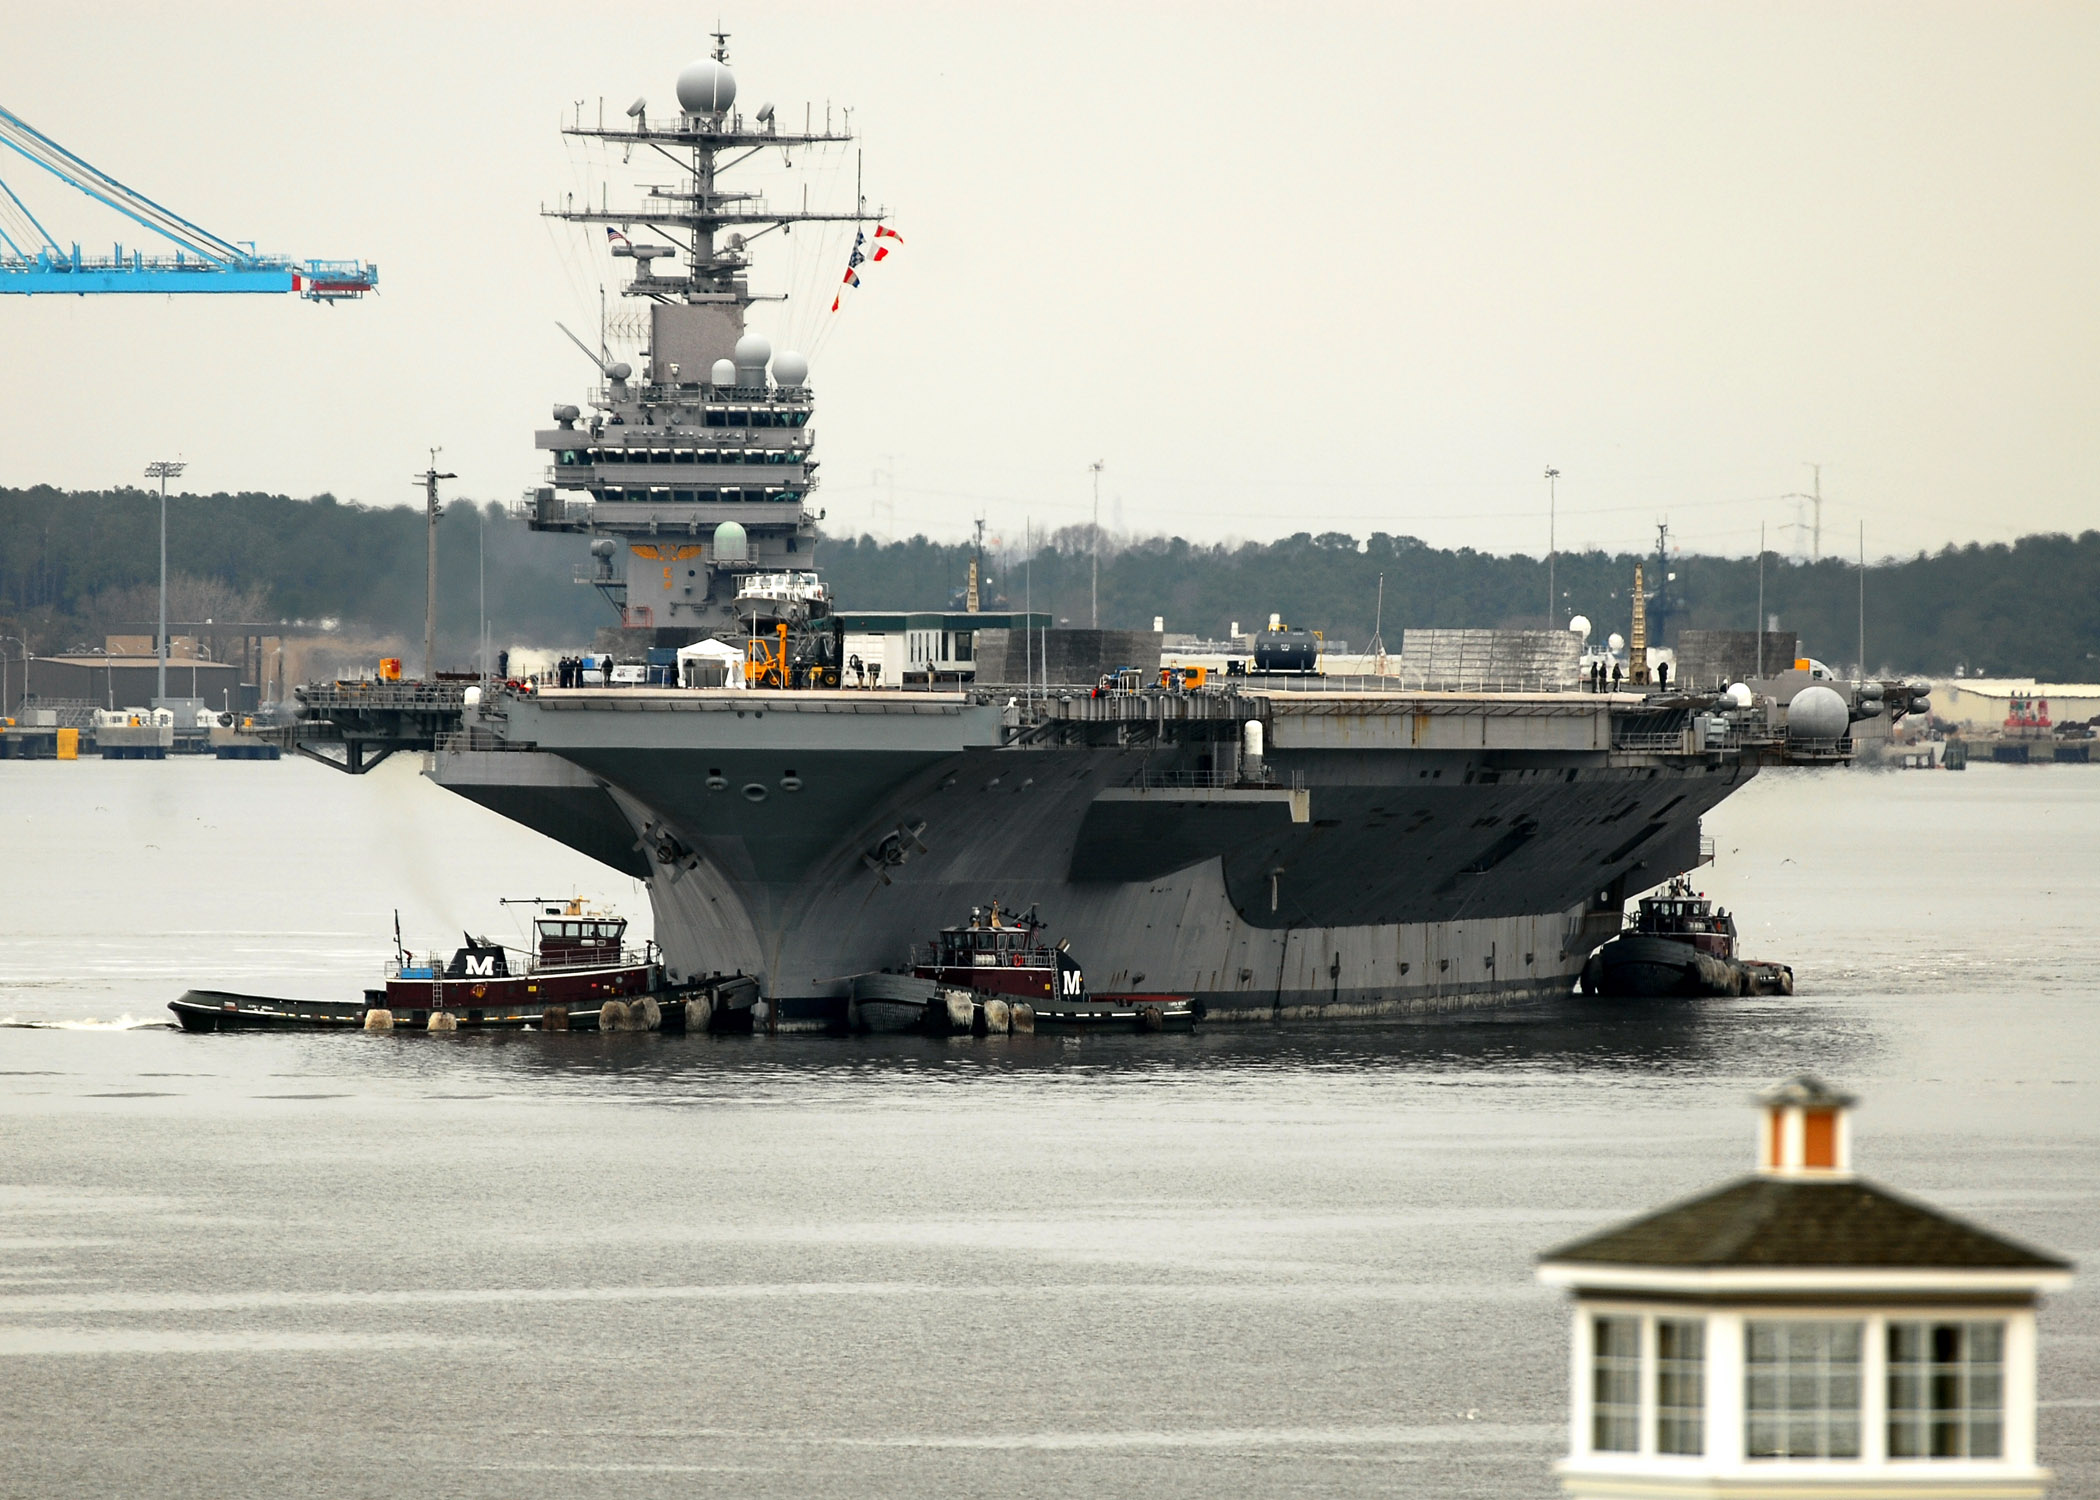 US Navy 070307-N-7241L-003 Nimitz-class aircraft carrier USS Theodore Roosevelt (CVN 71) makes her transit down the Elizabeth River from Naval Station Norfolk to Norfolk Naval Shipyard